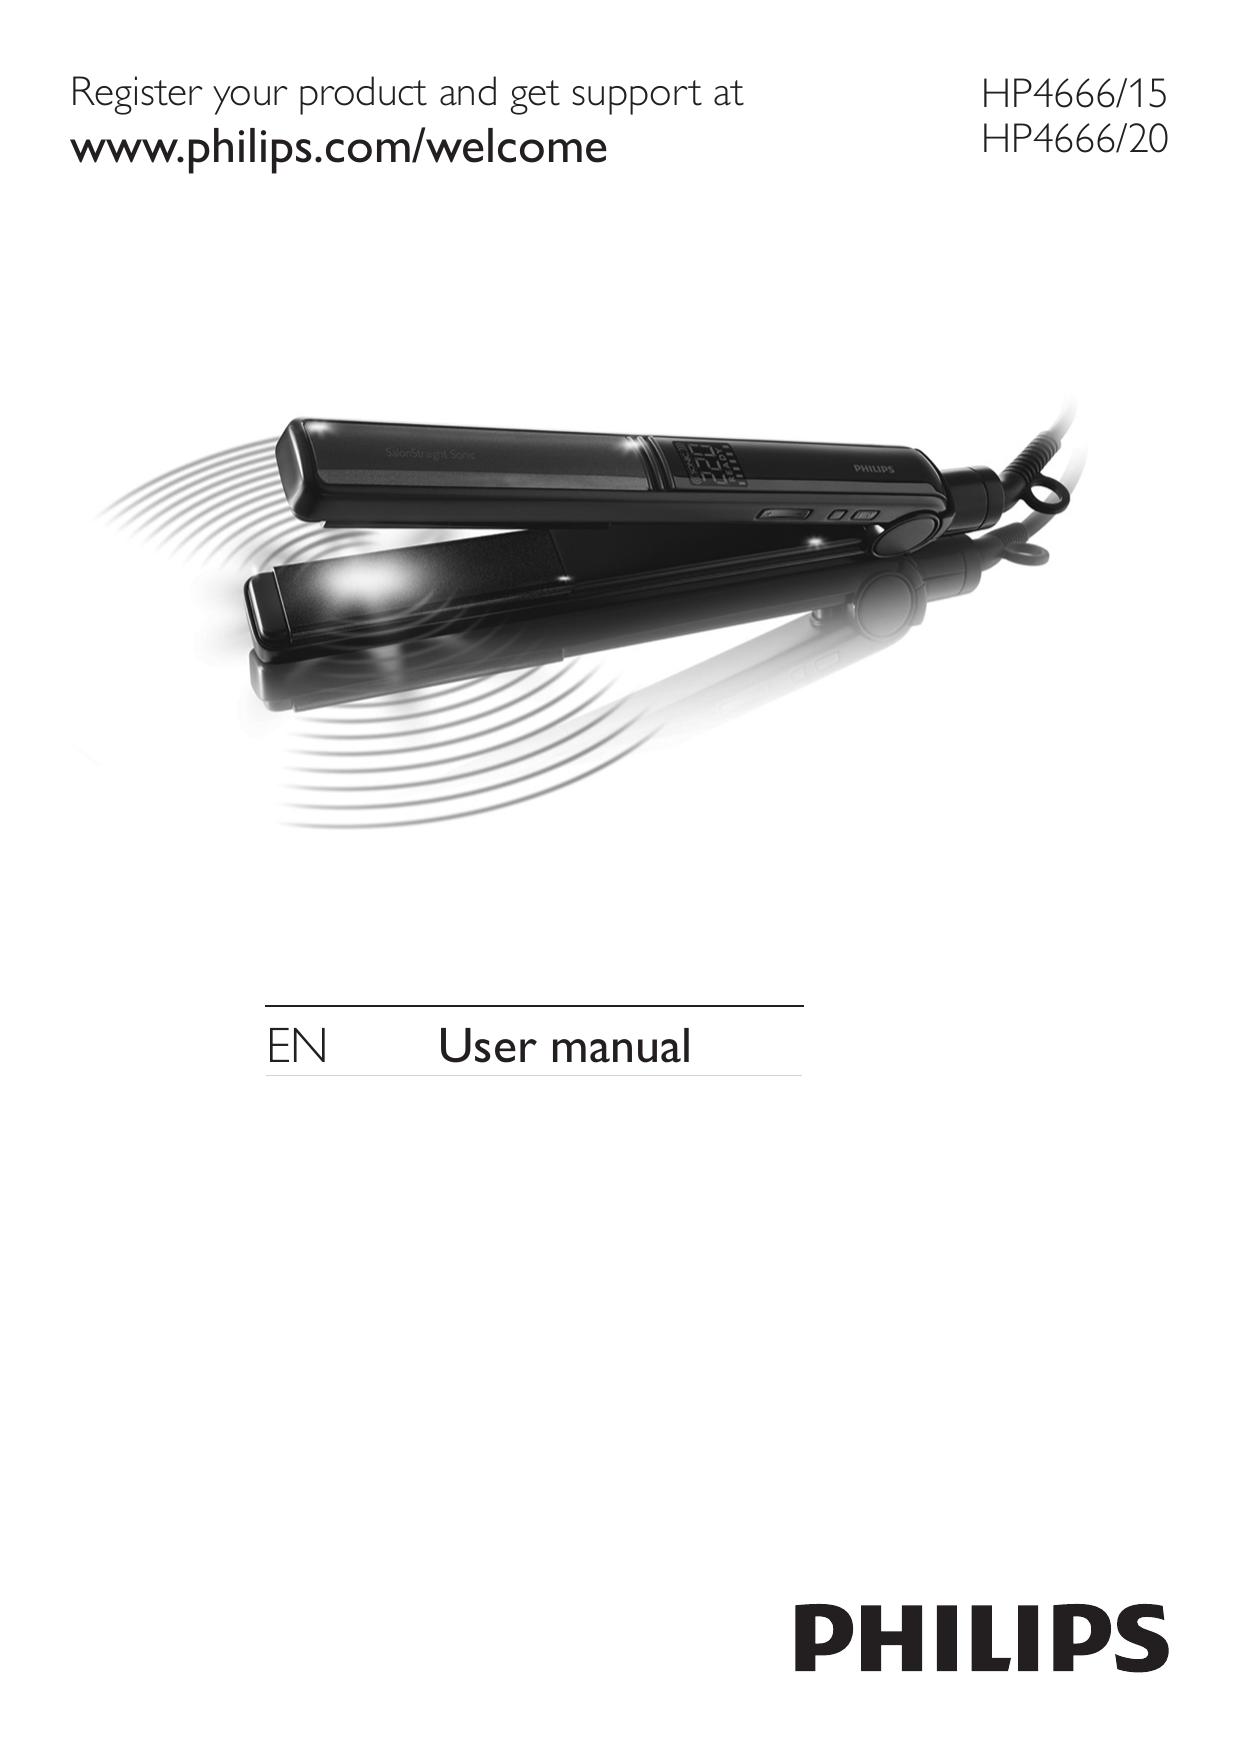 Philips HP4666/20 Hair Care Product User Manual